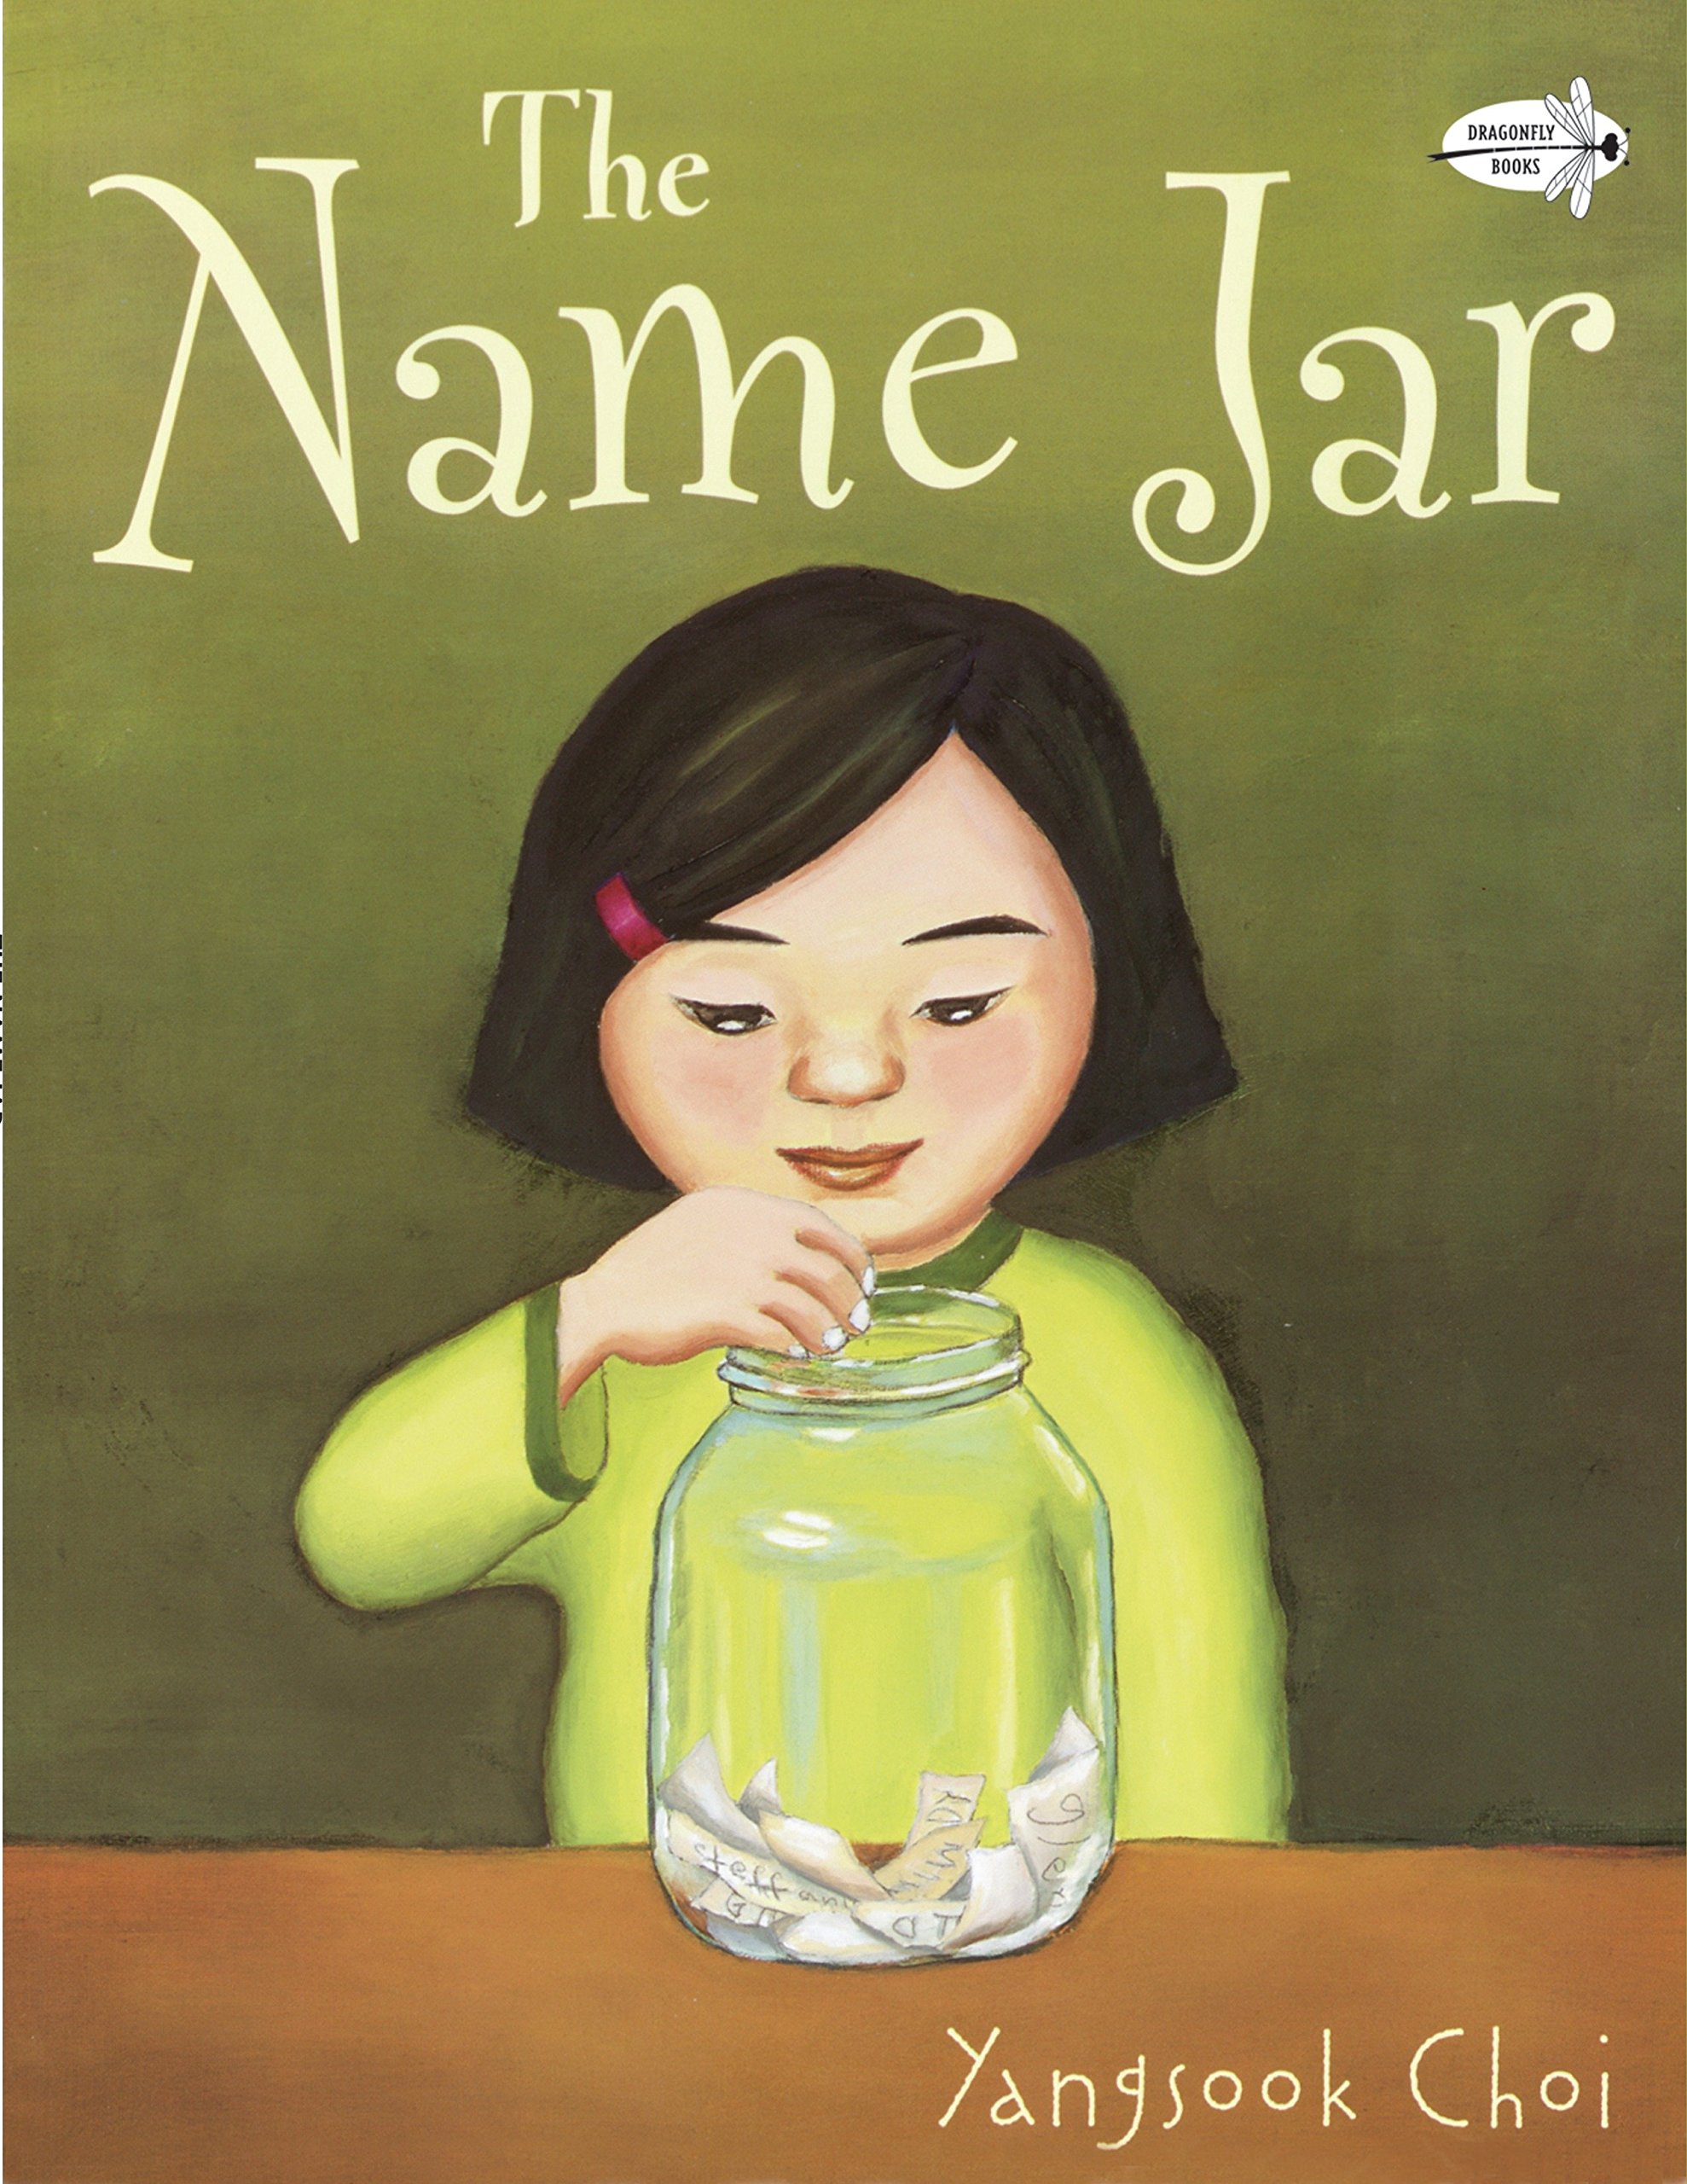 speech and language teaching concepts for The Name Jar in speech therapy